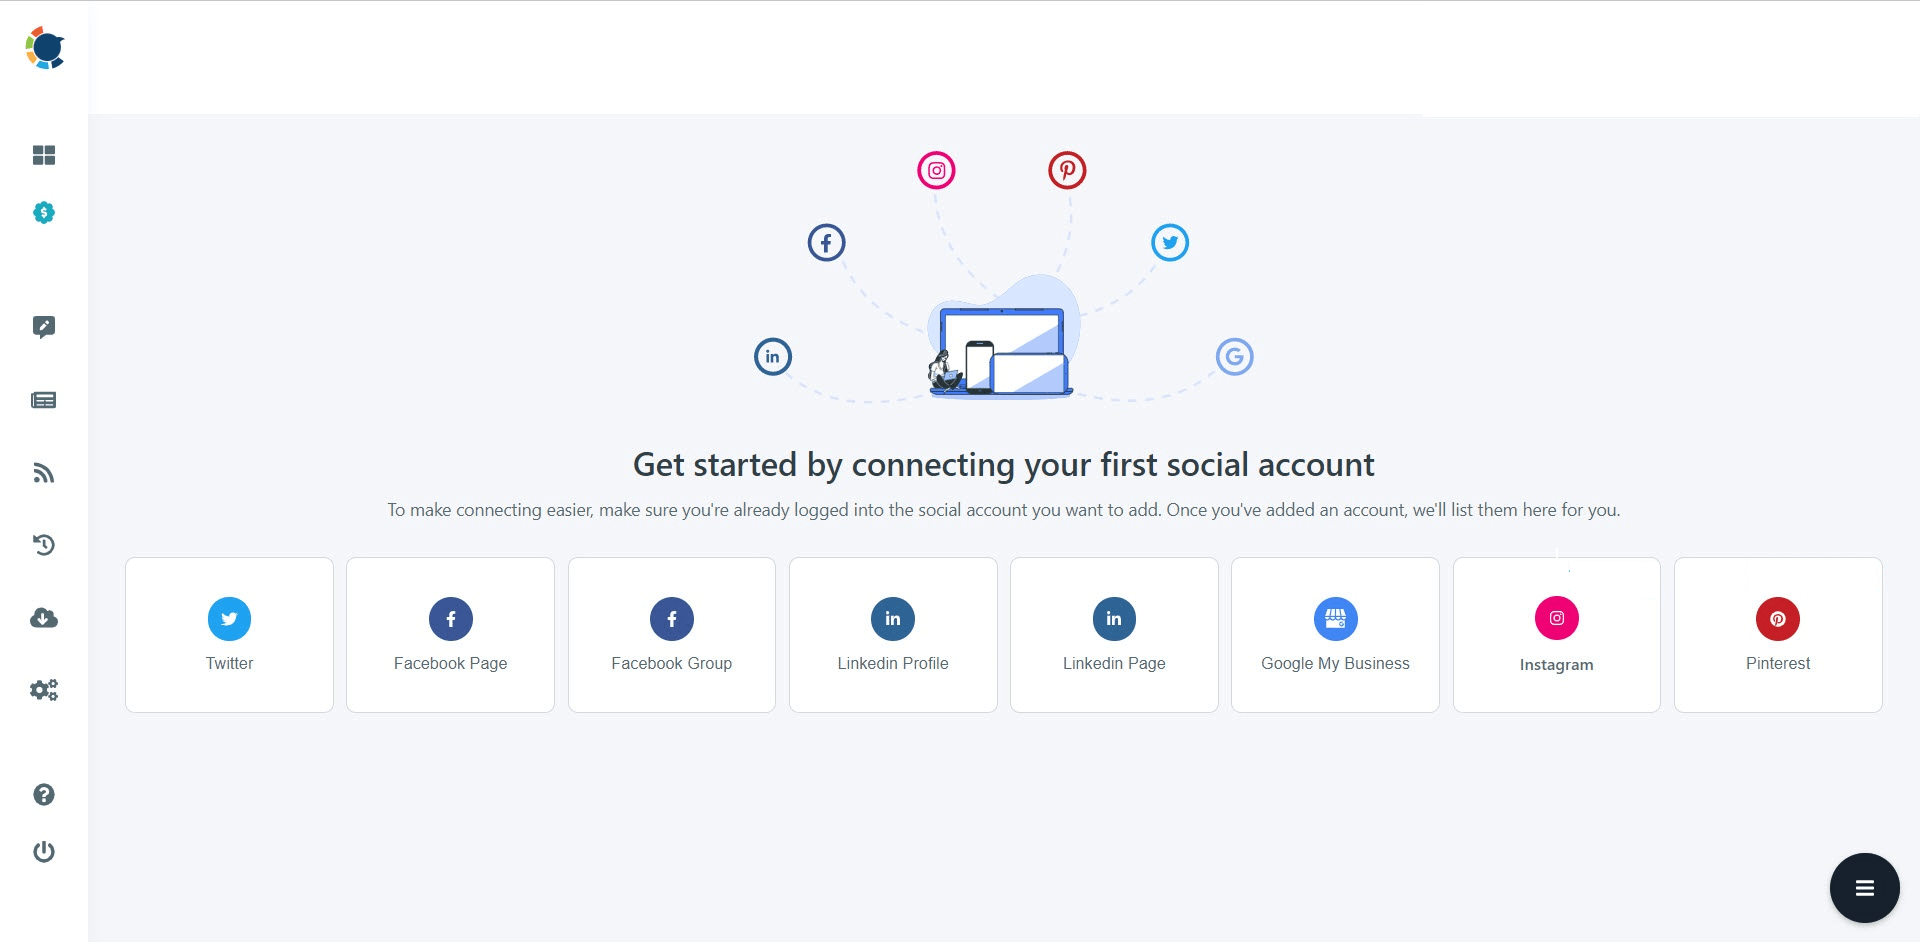 Select the account to automate